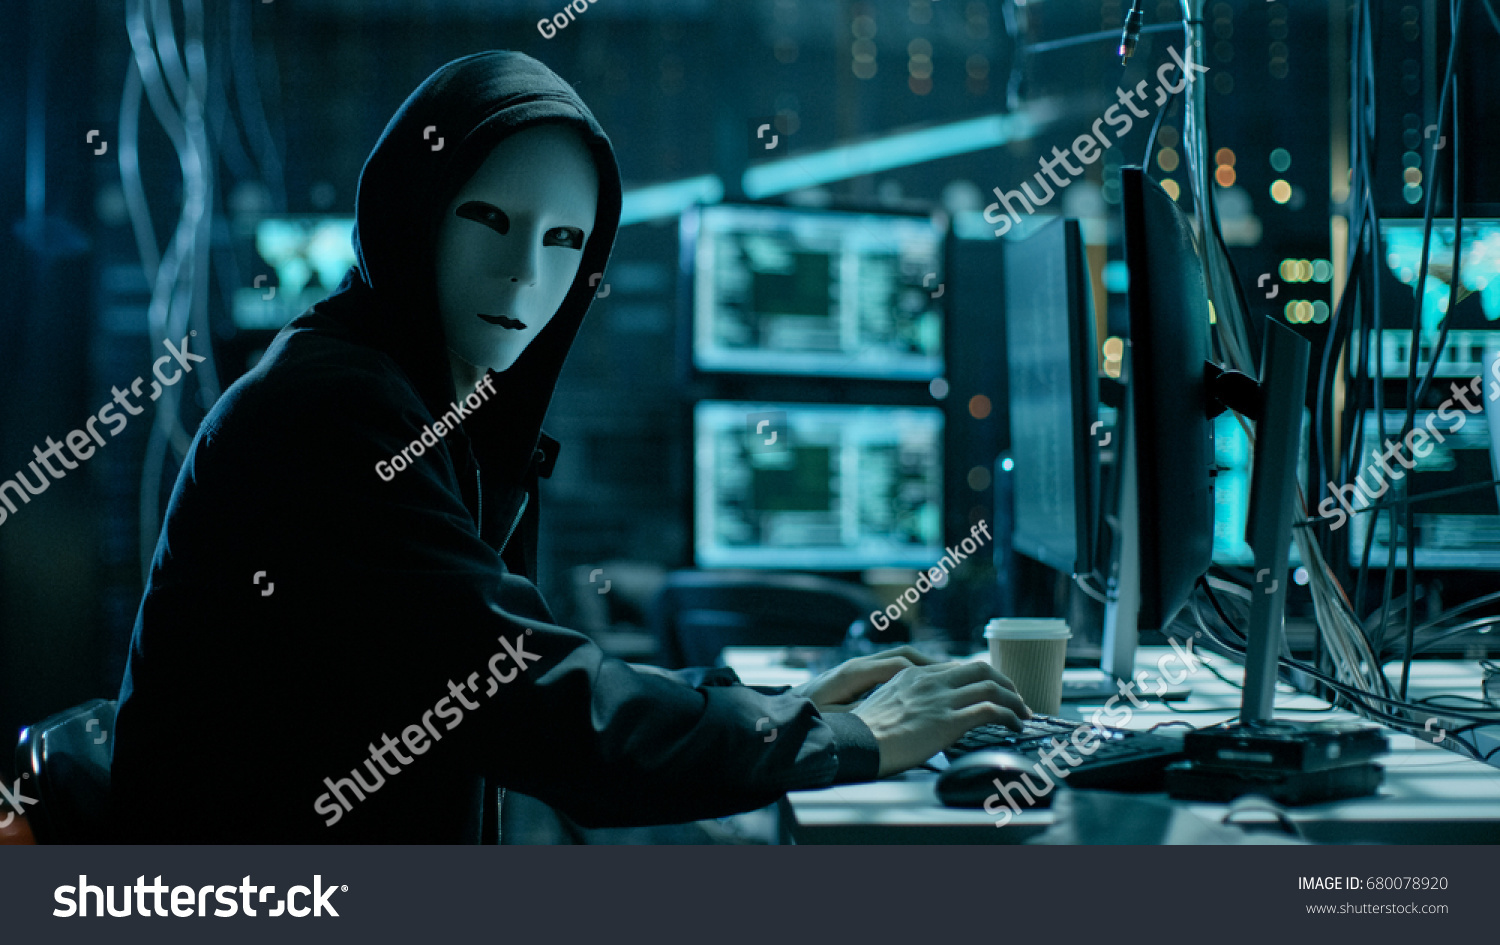 Masked Hacker is Using Computer for Organizing Massive Data Breach Attack on Corporate Servers. They're in Underground Secret Location Surrounded by Displays and Cables. #680078920